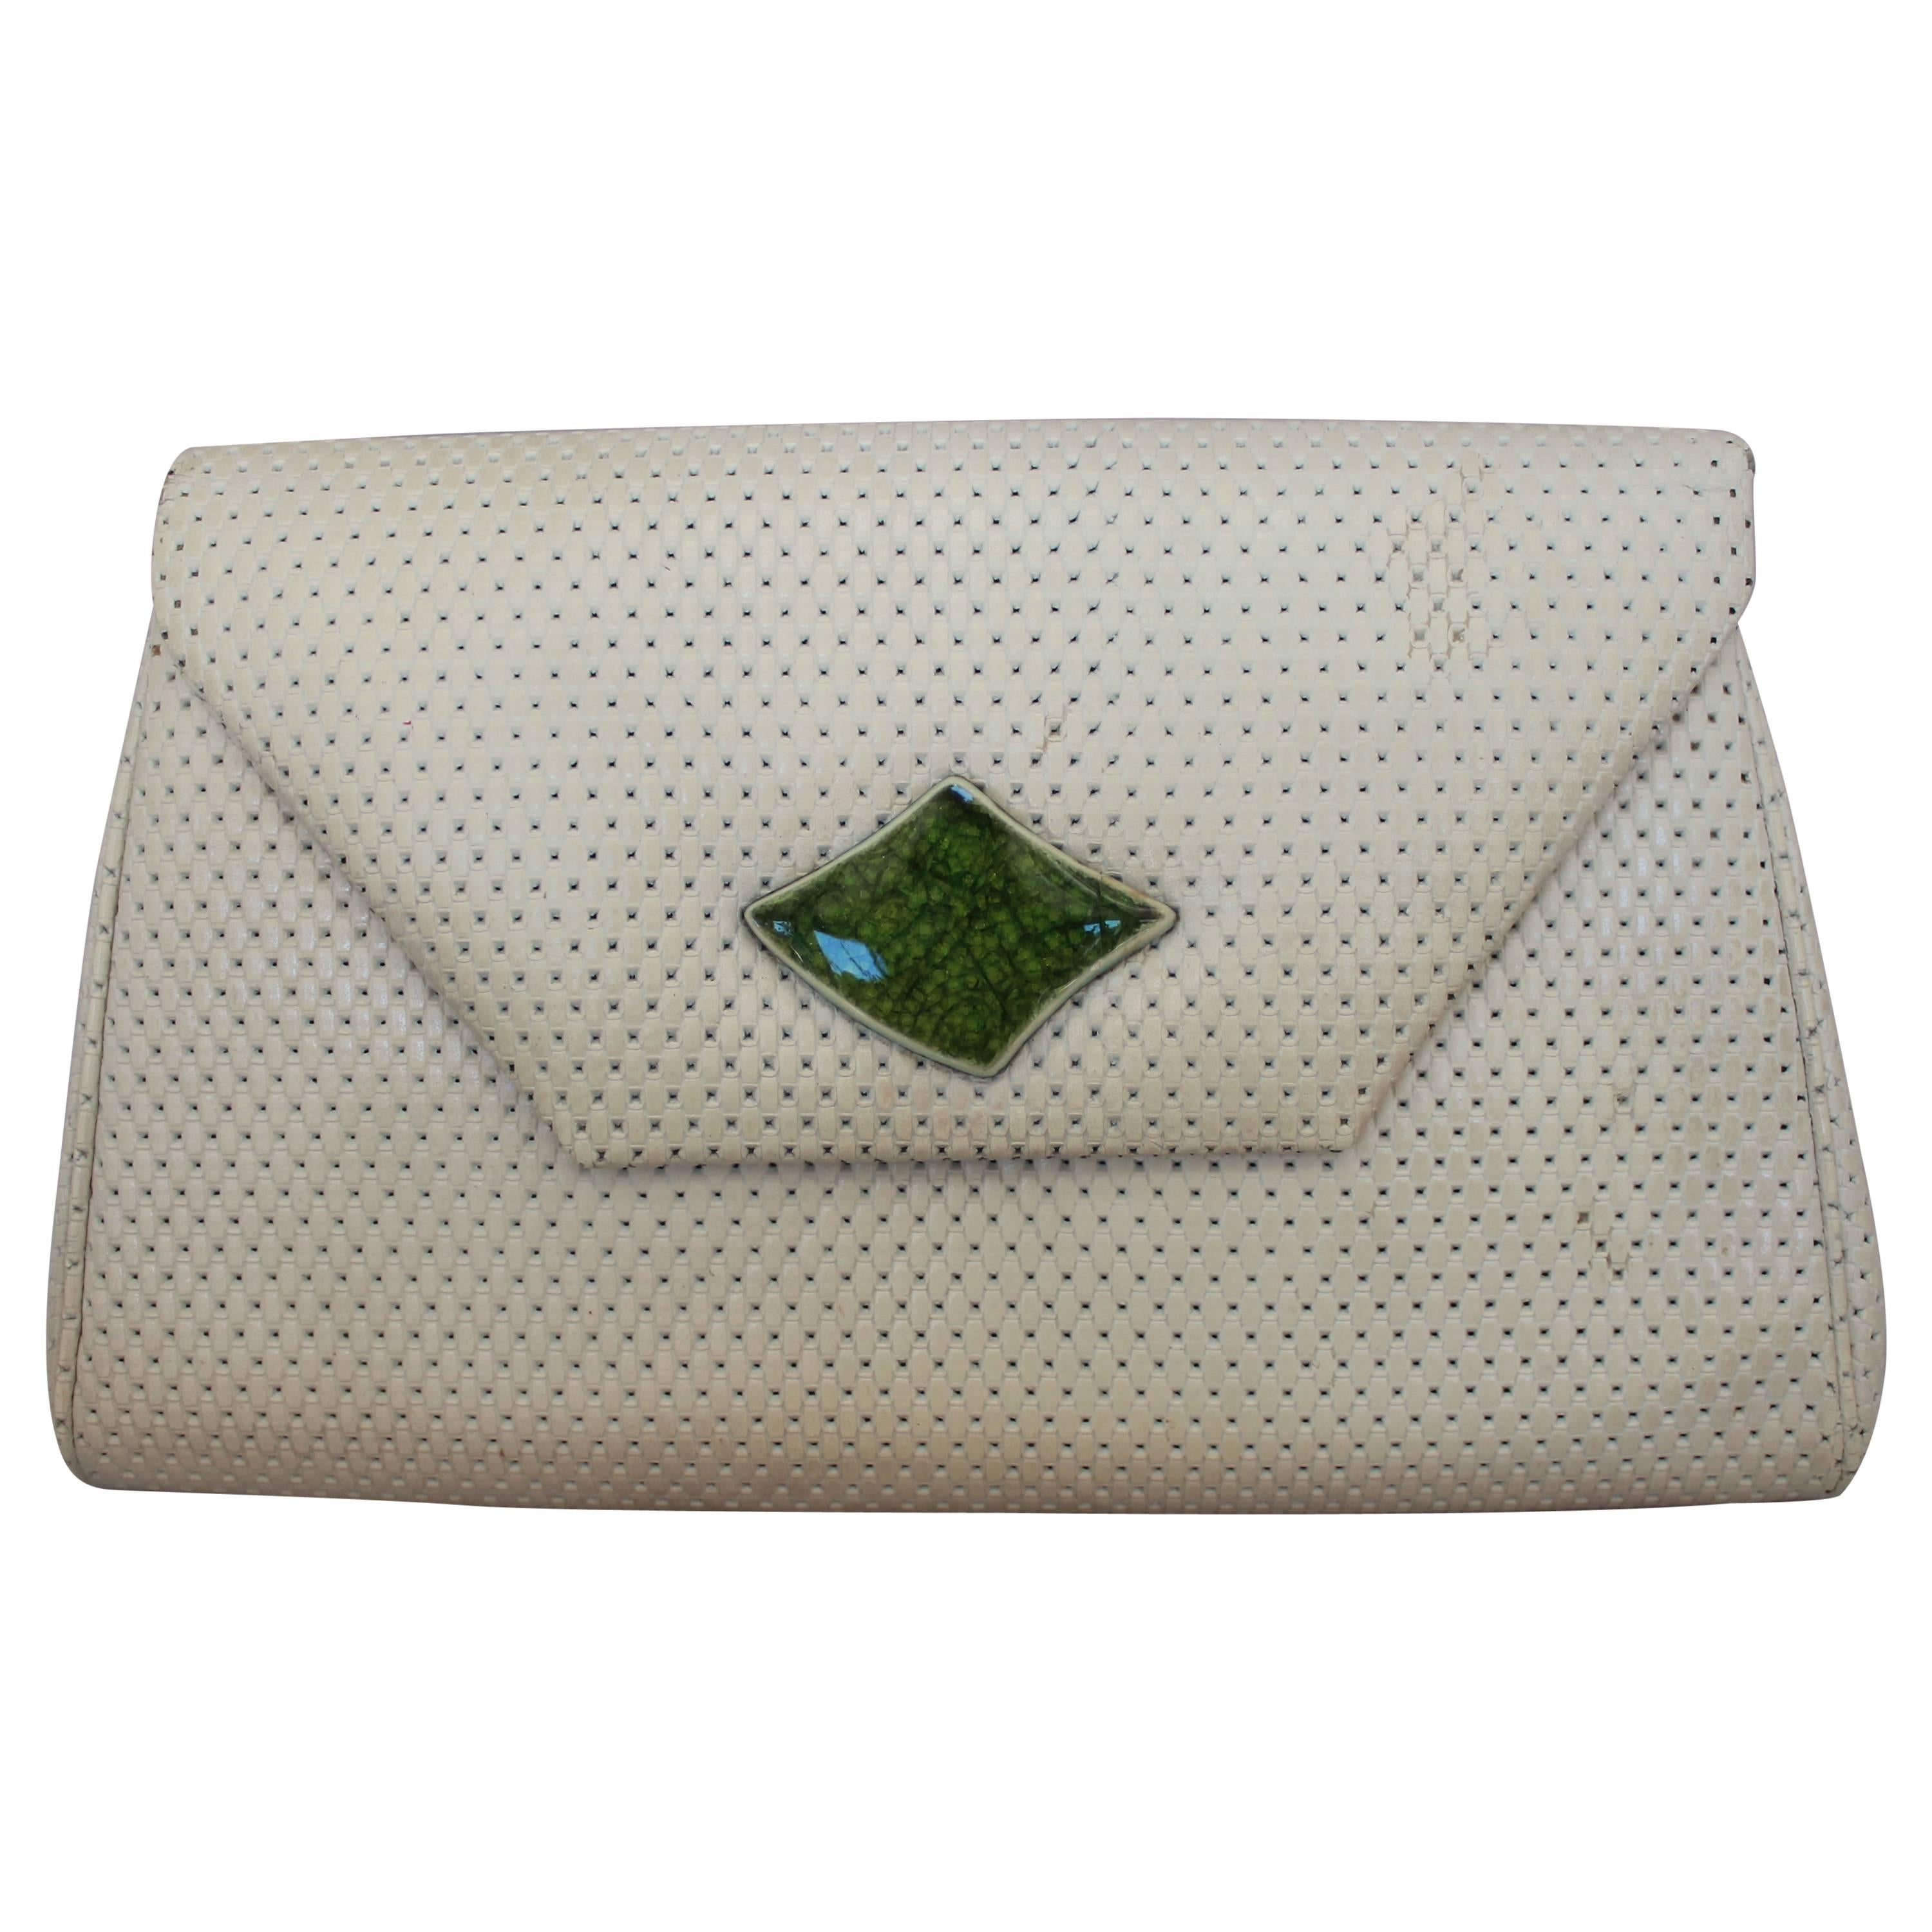 Paris Jacomo Ivory Perforated Leather Clutch with Green Stone - circa 1980's 